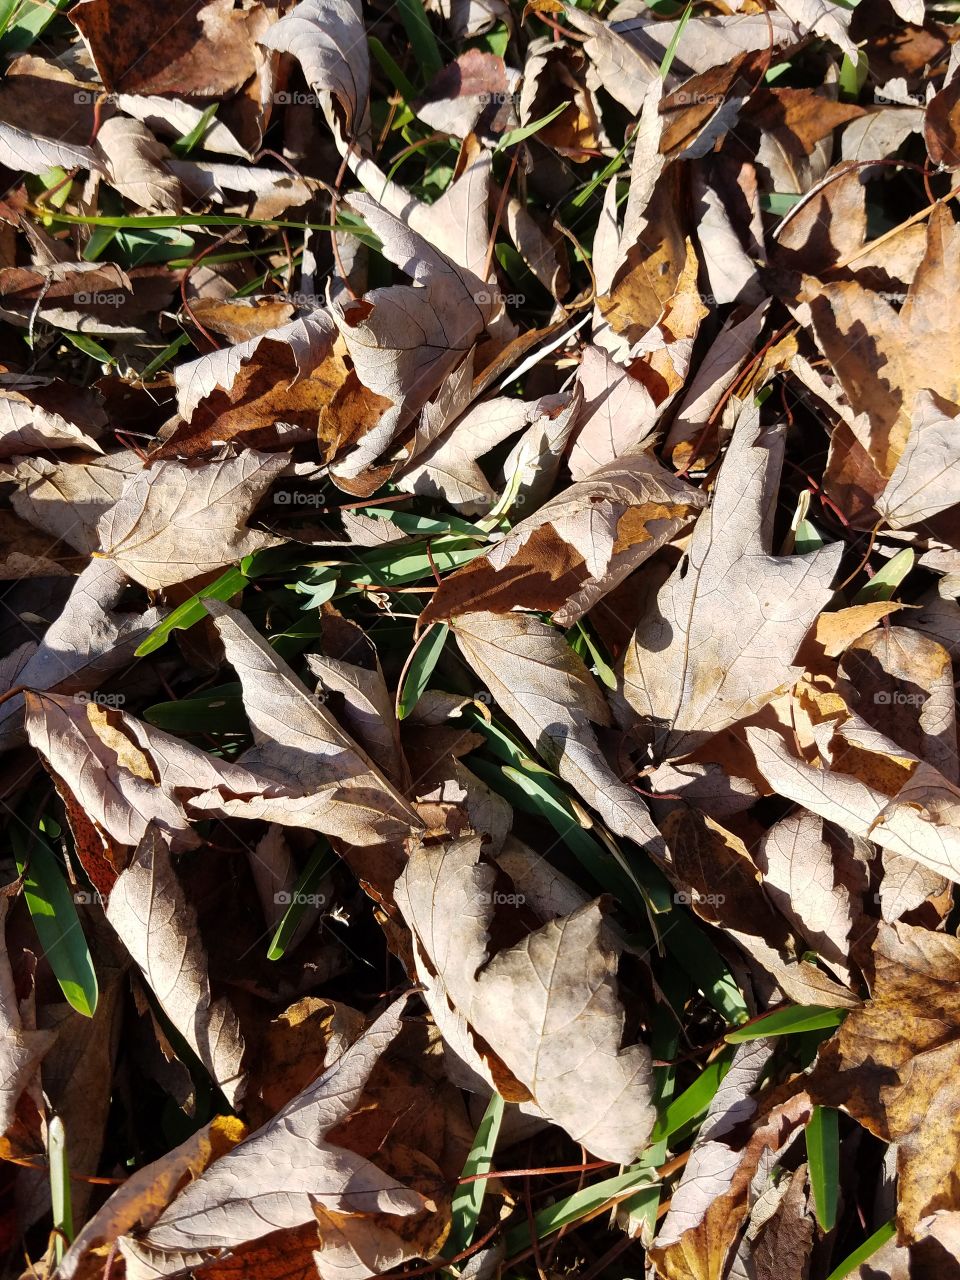 Close-up of leaves on the ground